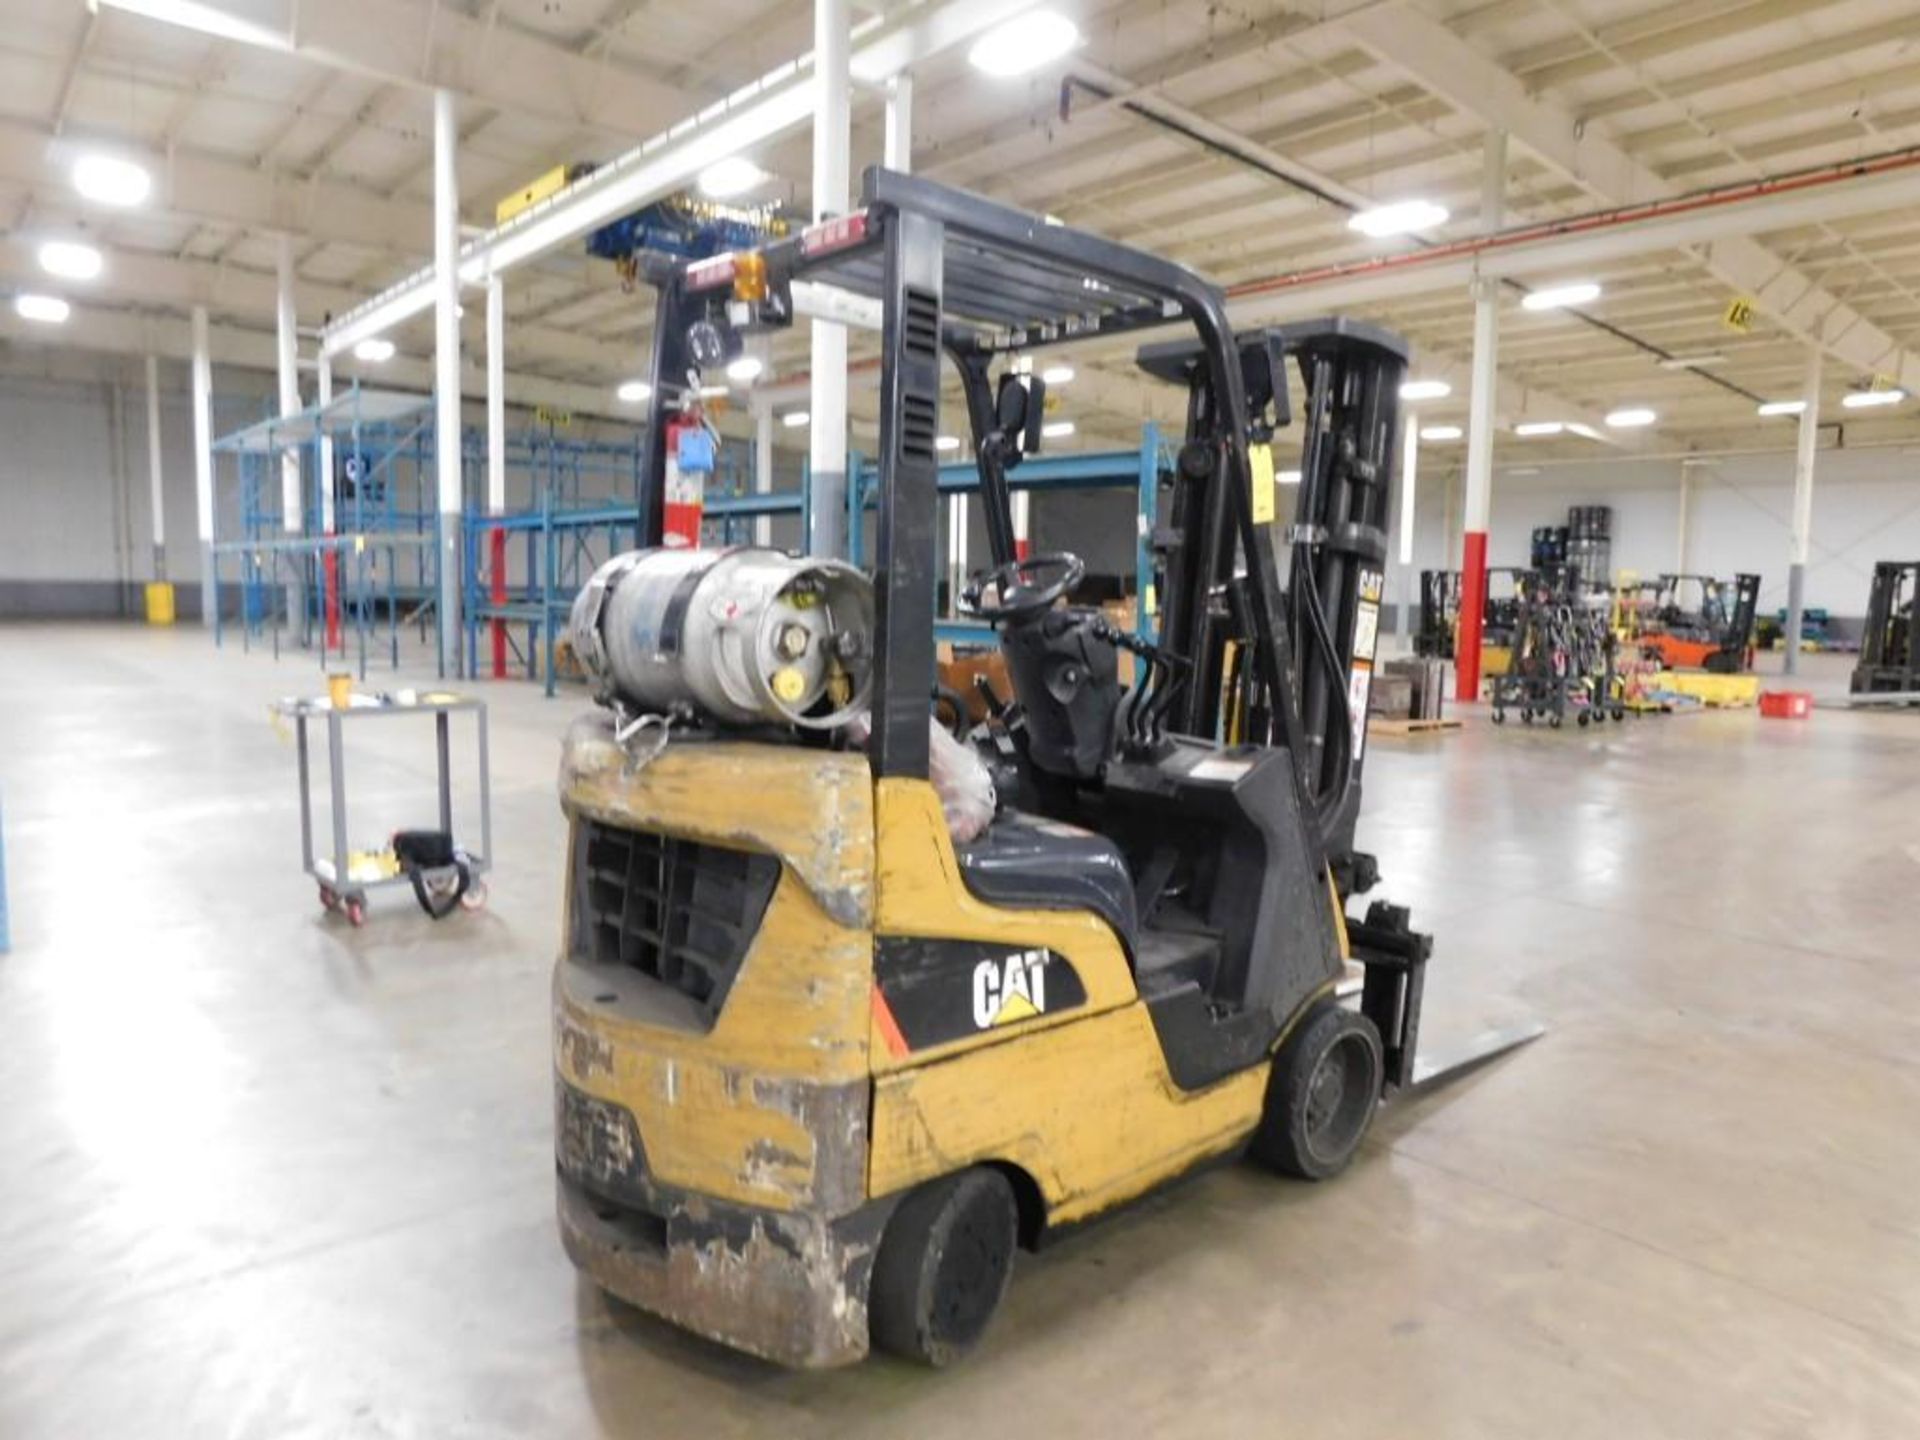 Caterpillar 2C3000 Fork Lift Truck, 6380 Lb. Max. Load Capacity, Overhead Guard, 3- Stage Mast, 187" - Image 3 of 9